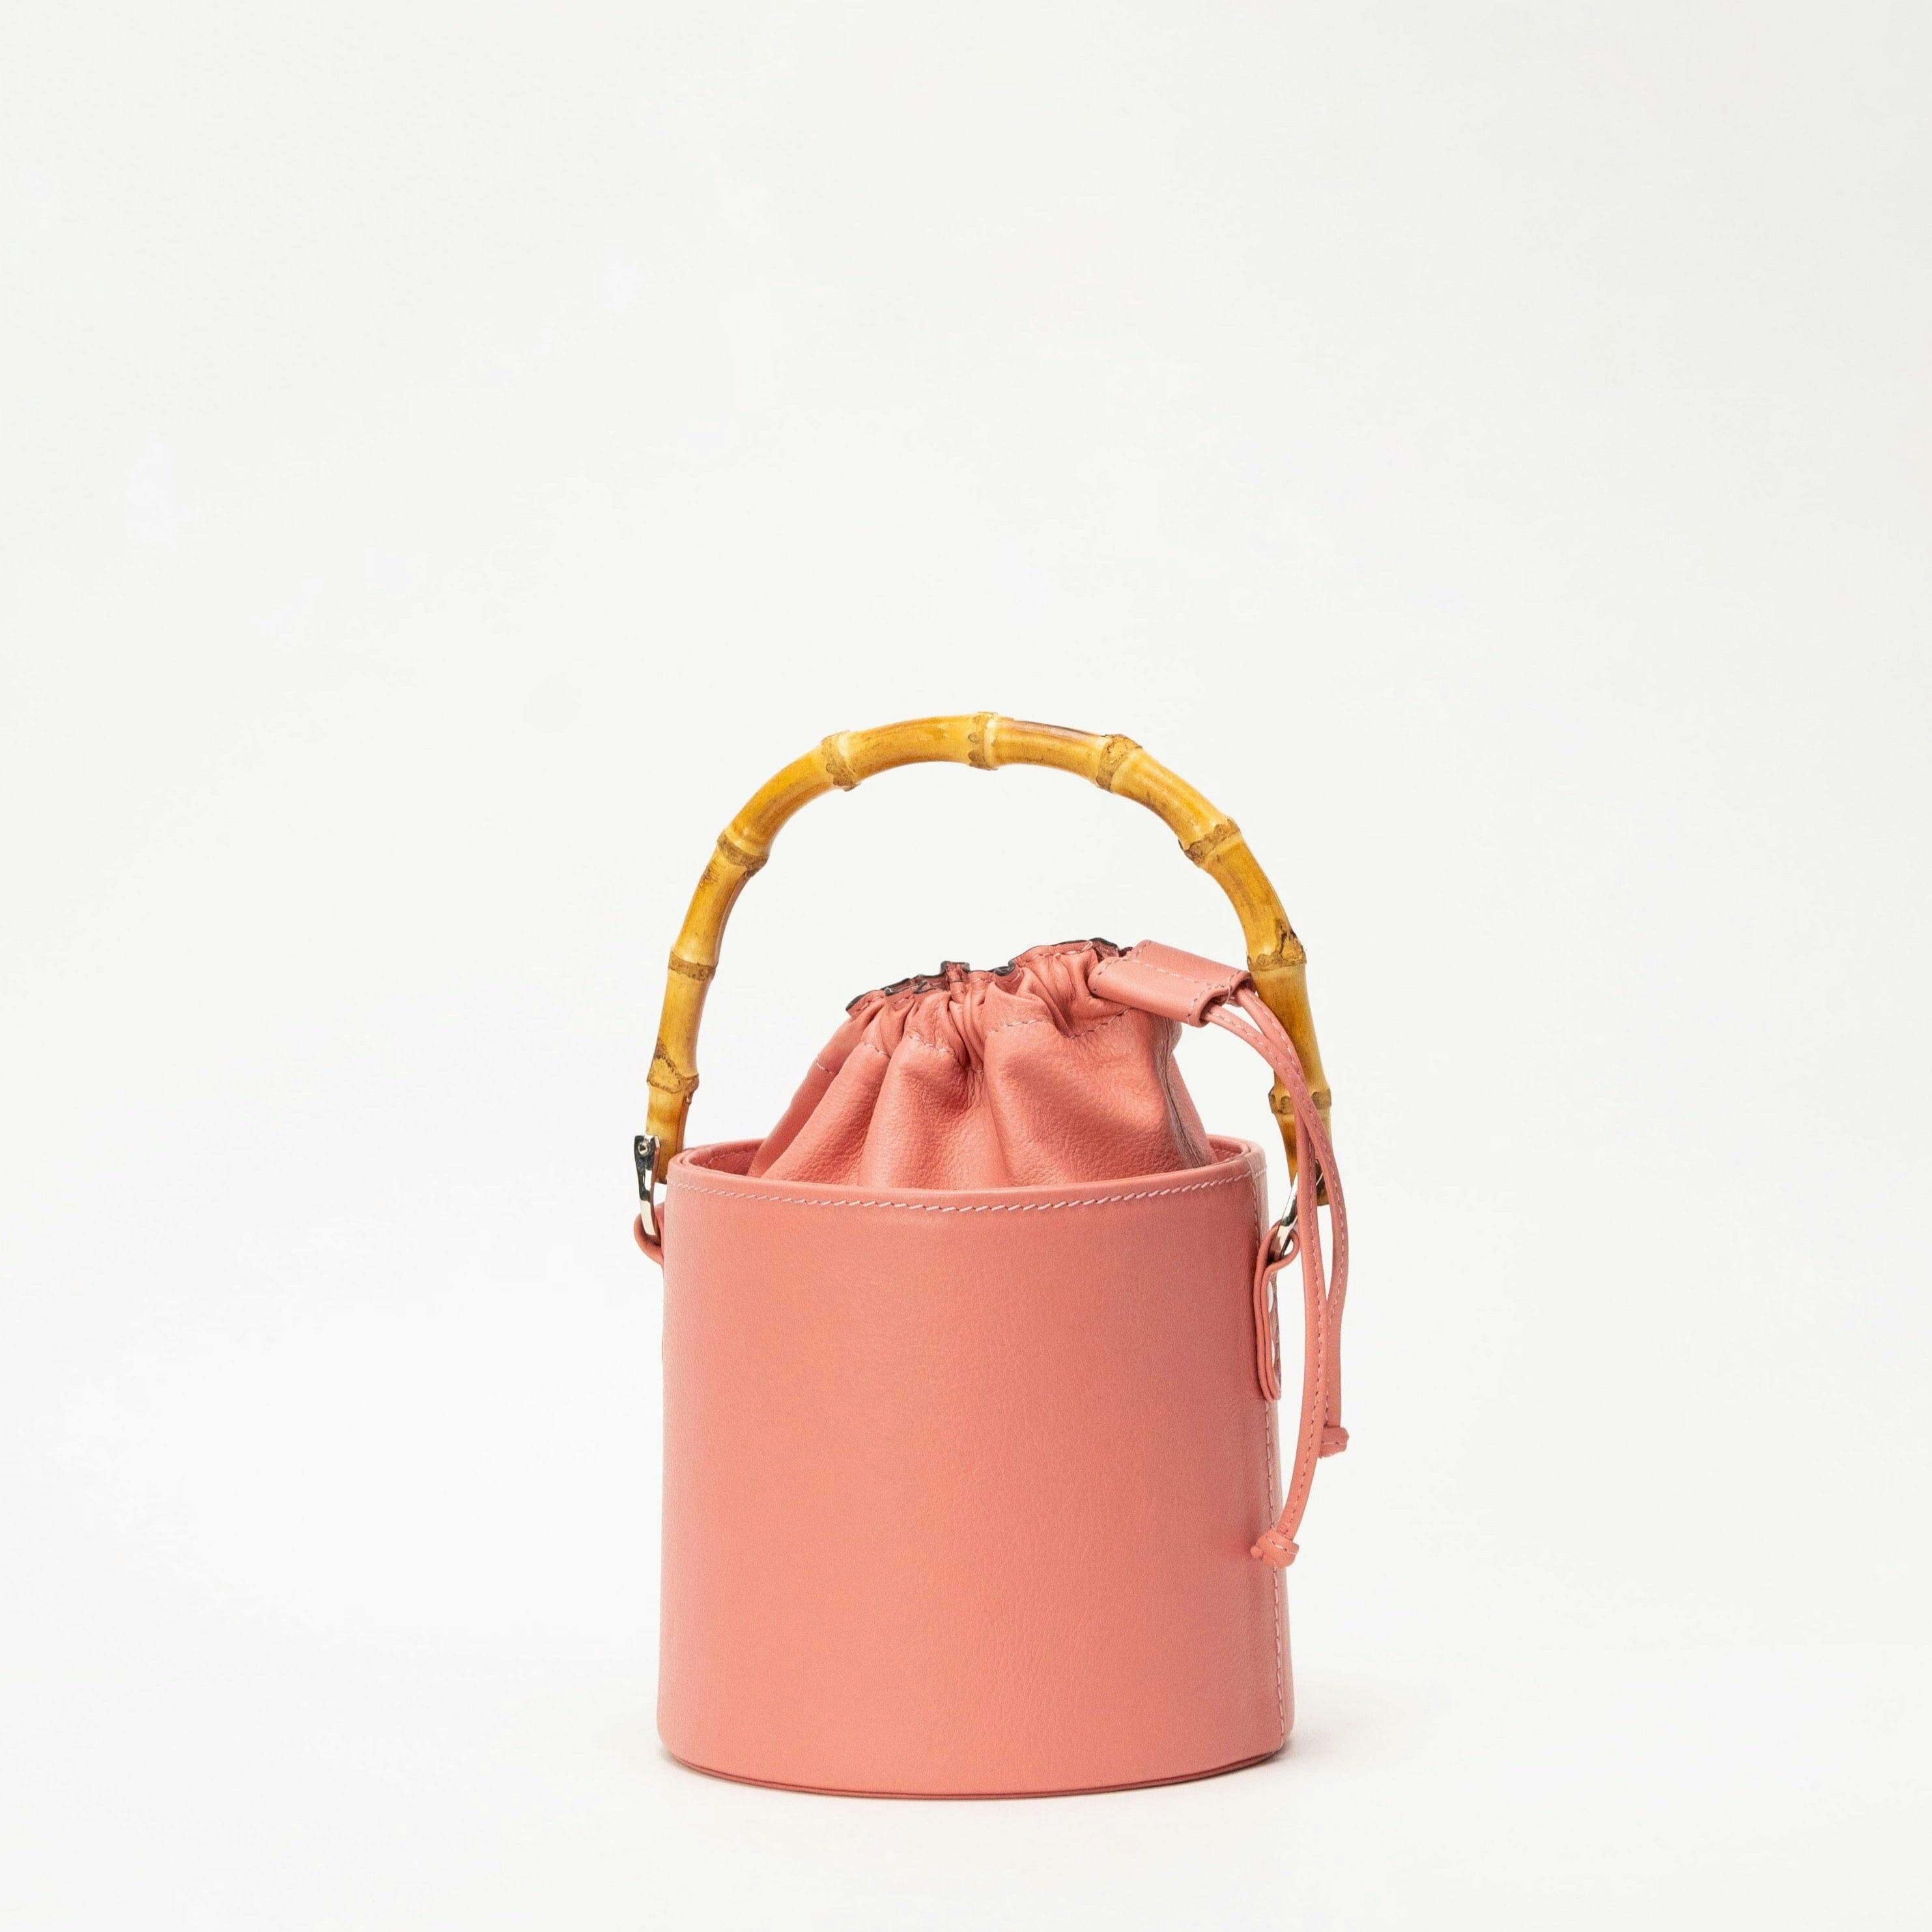 Ivy Bucket Bag in Blush Pink, a product by Mistry 